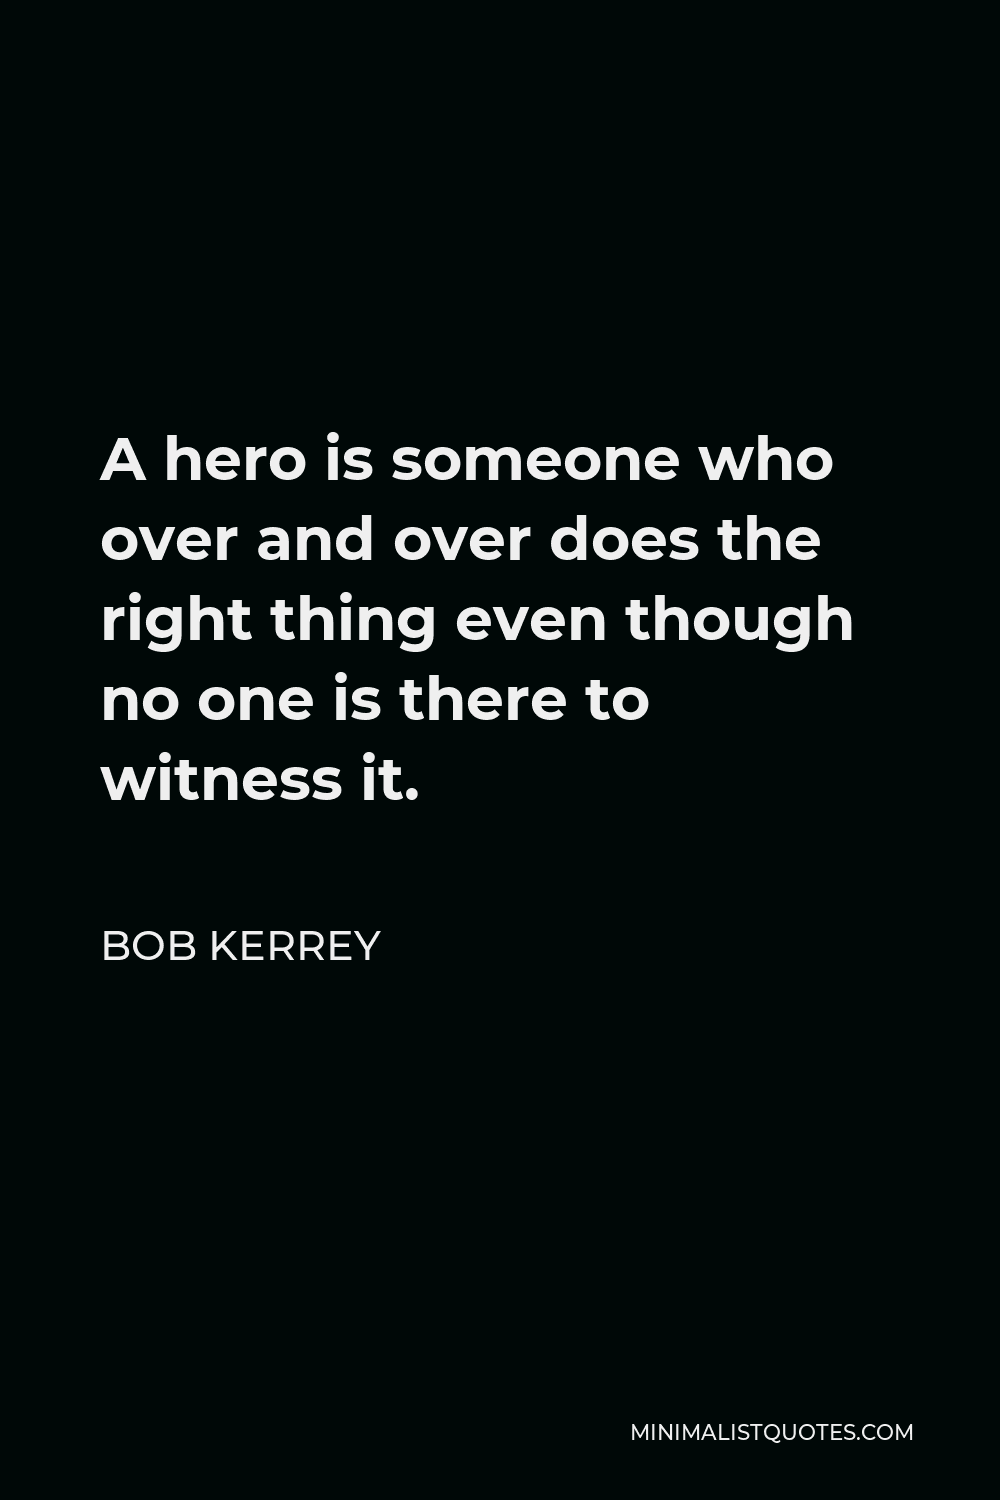 Bob Kerrey Quote - A hero is someone who over and over does the right thing even though no one is there to witness it.